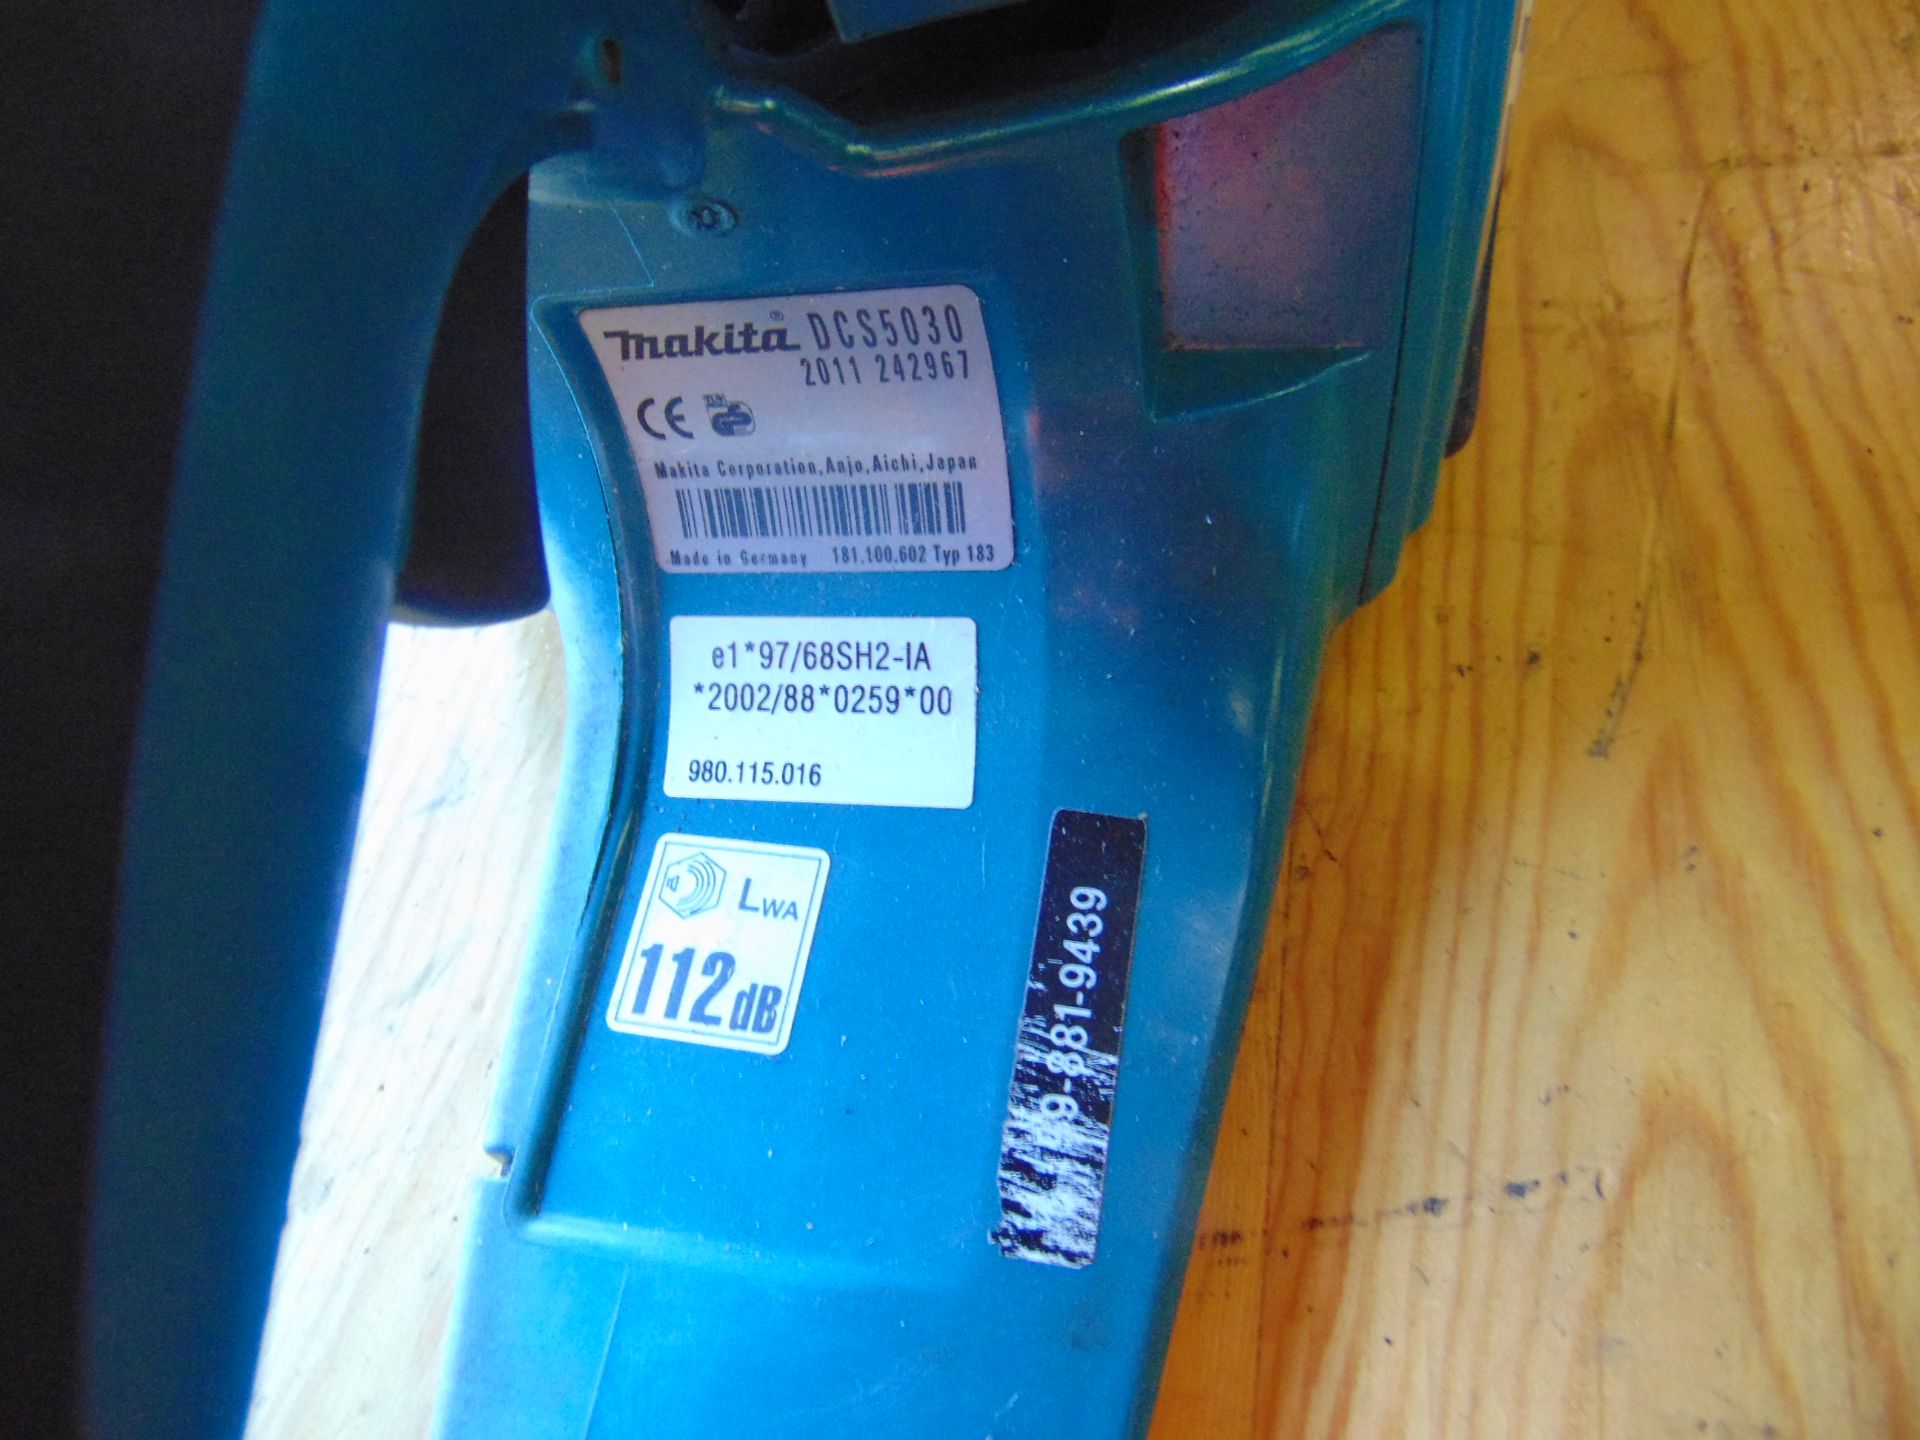 Makita DS5030 50cc Chain Saw from UK MoD - Image 5 of 5